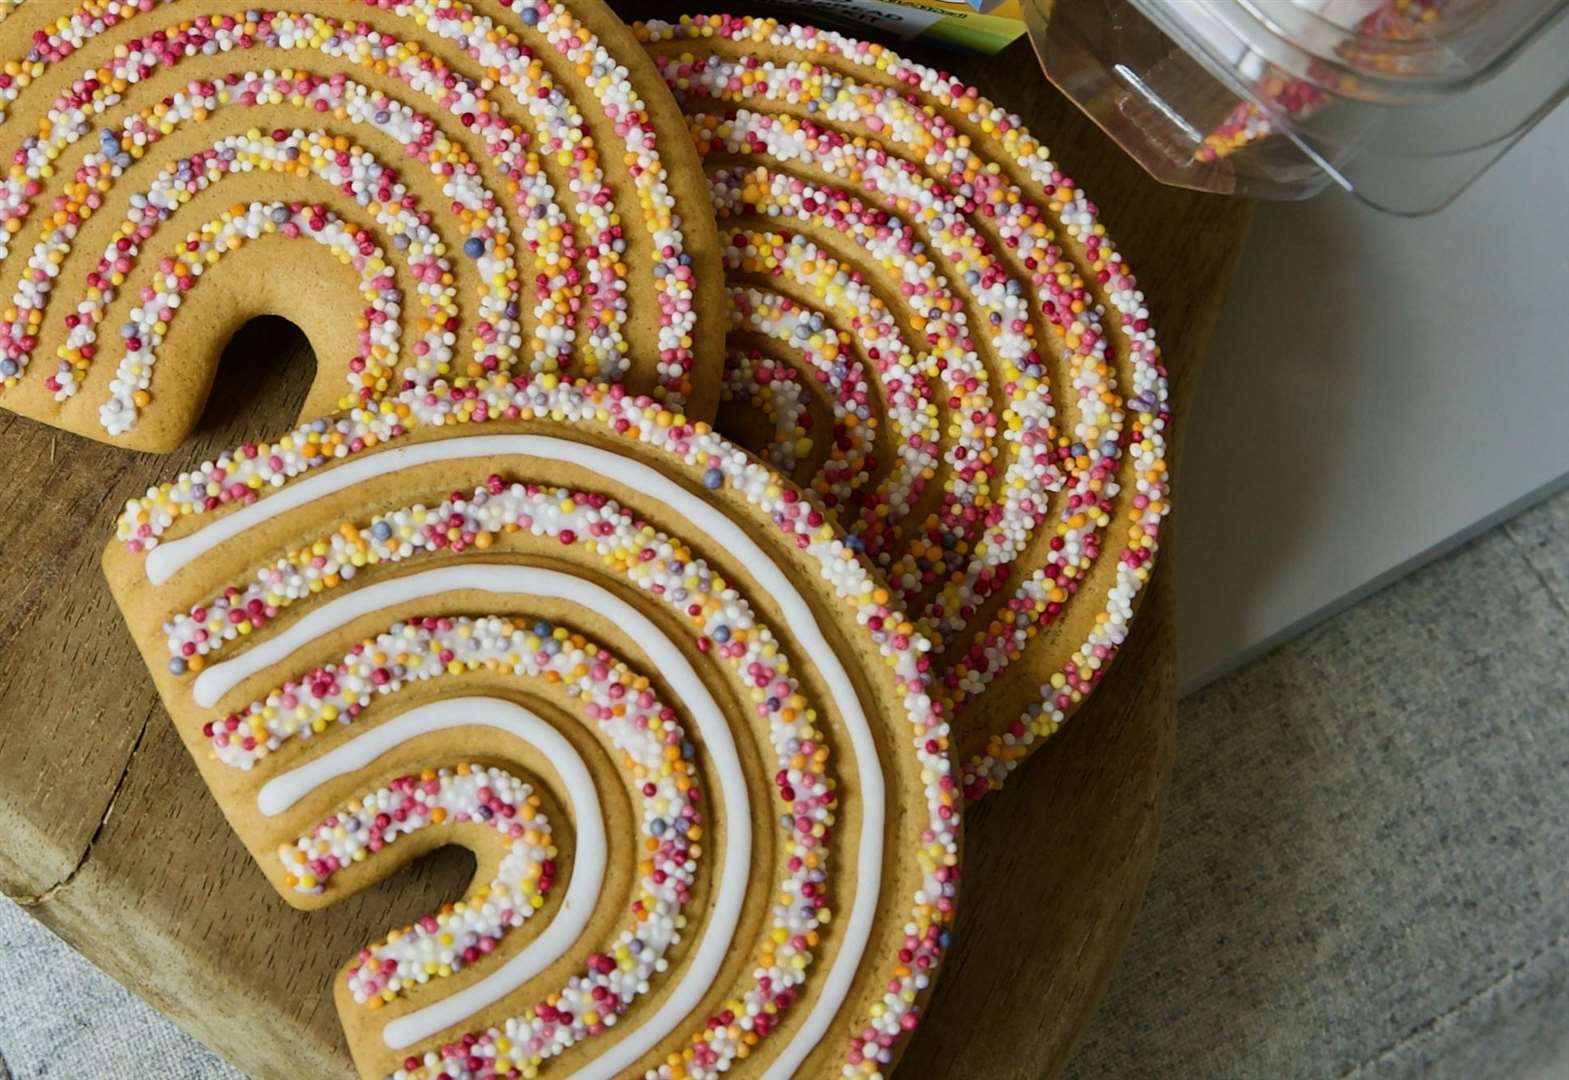 The gingerbread rainbow biscuits.